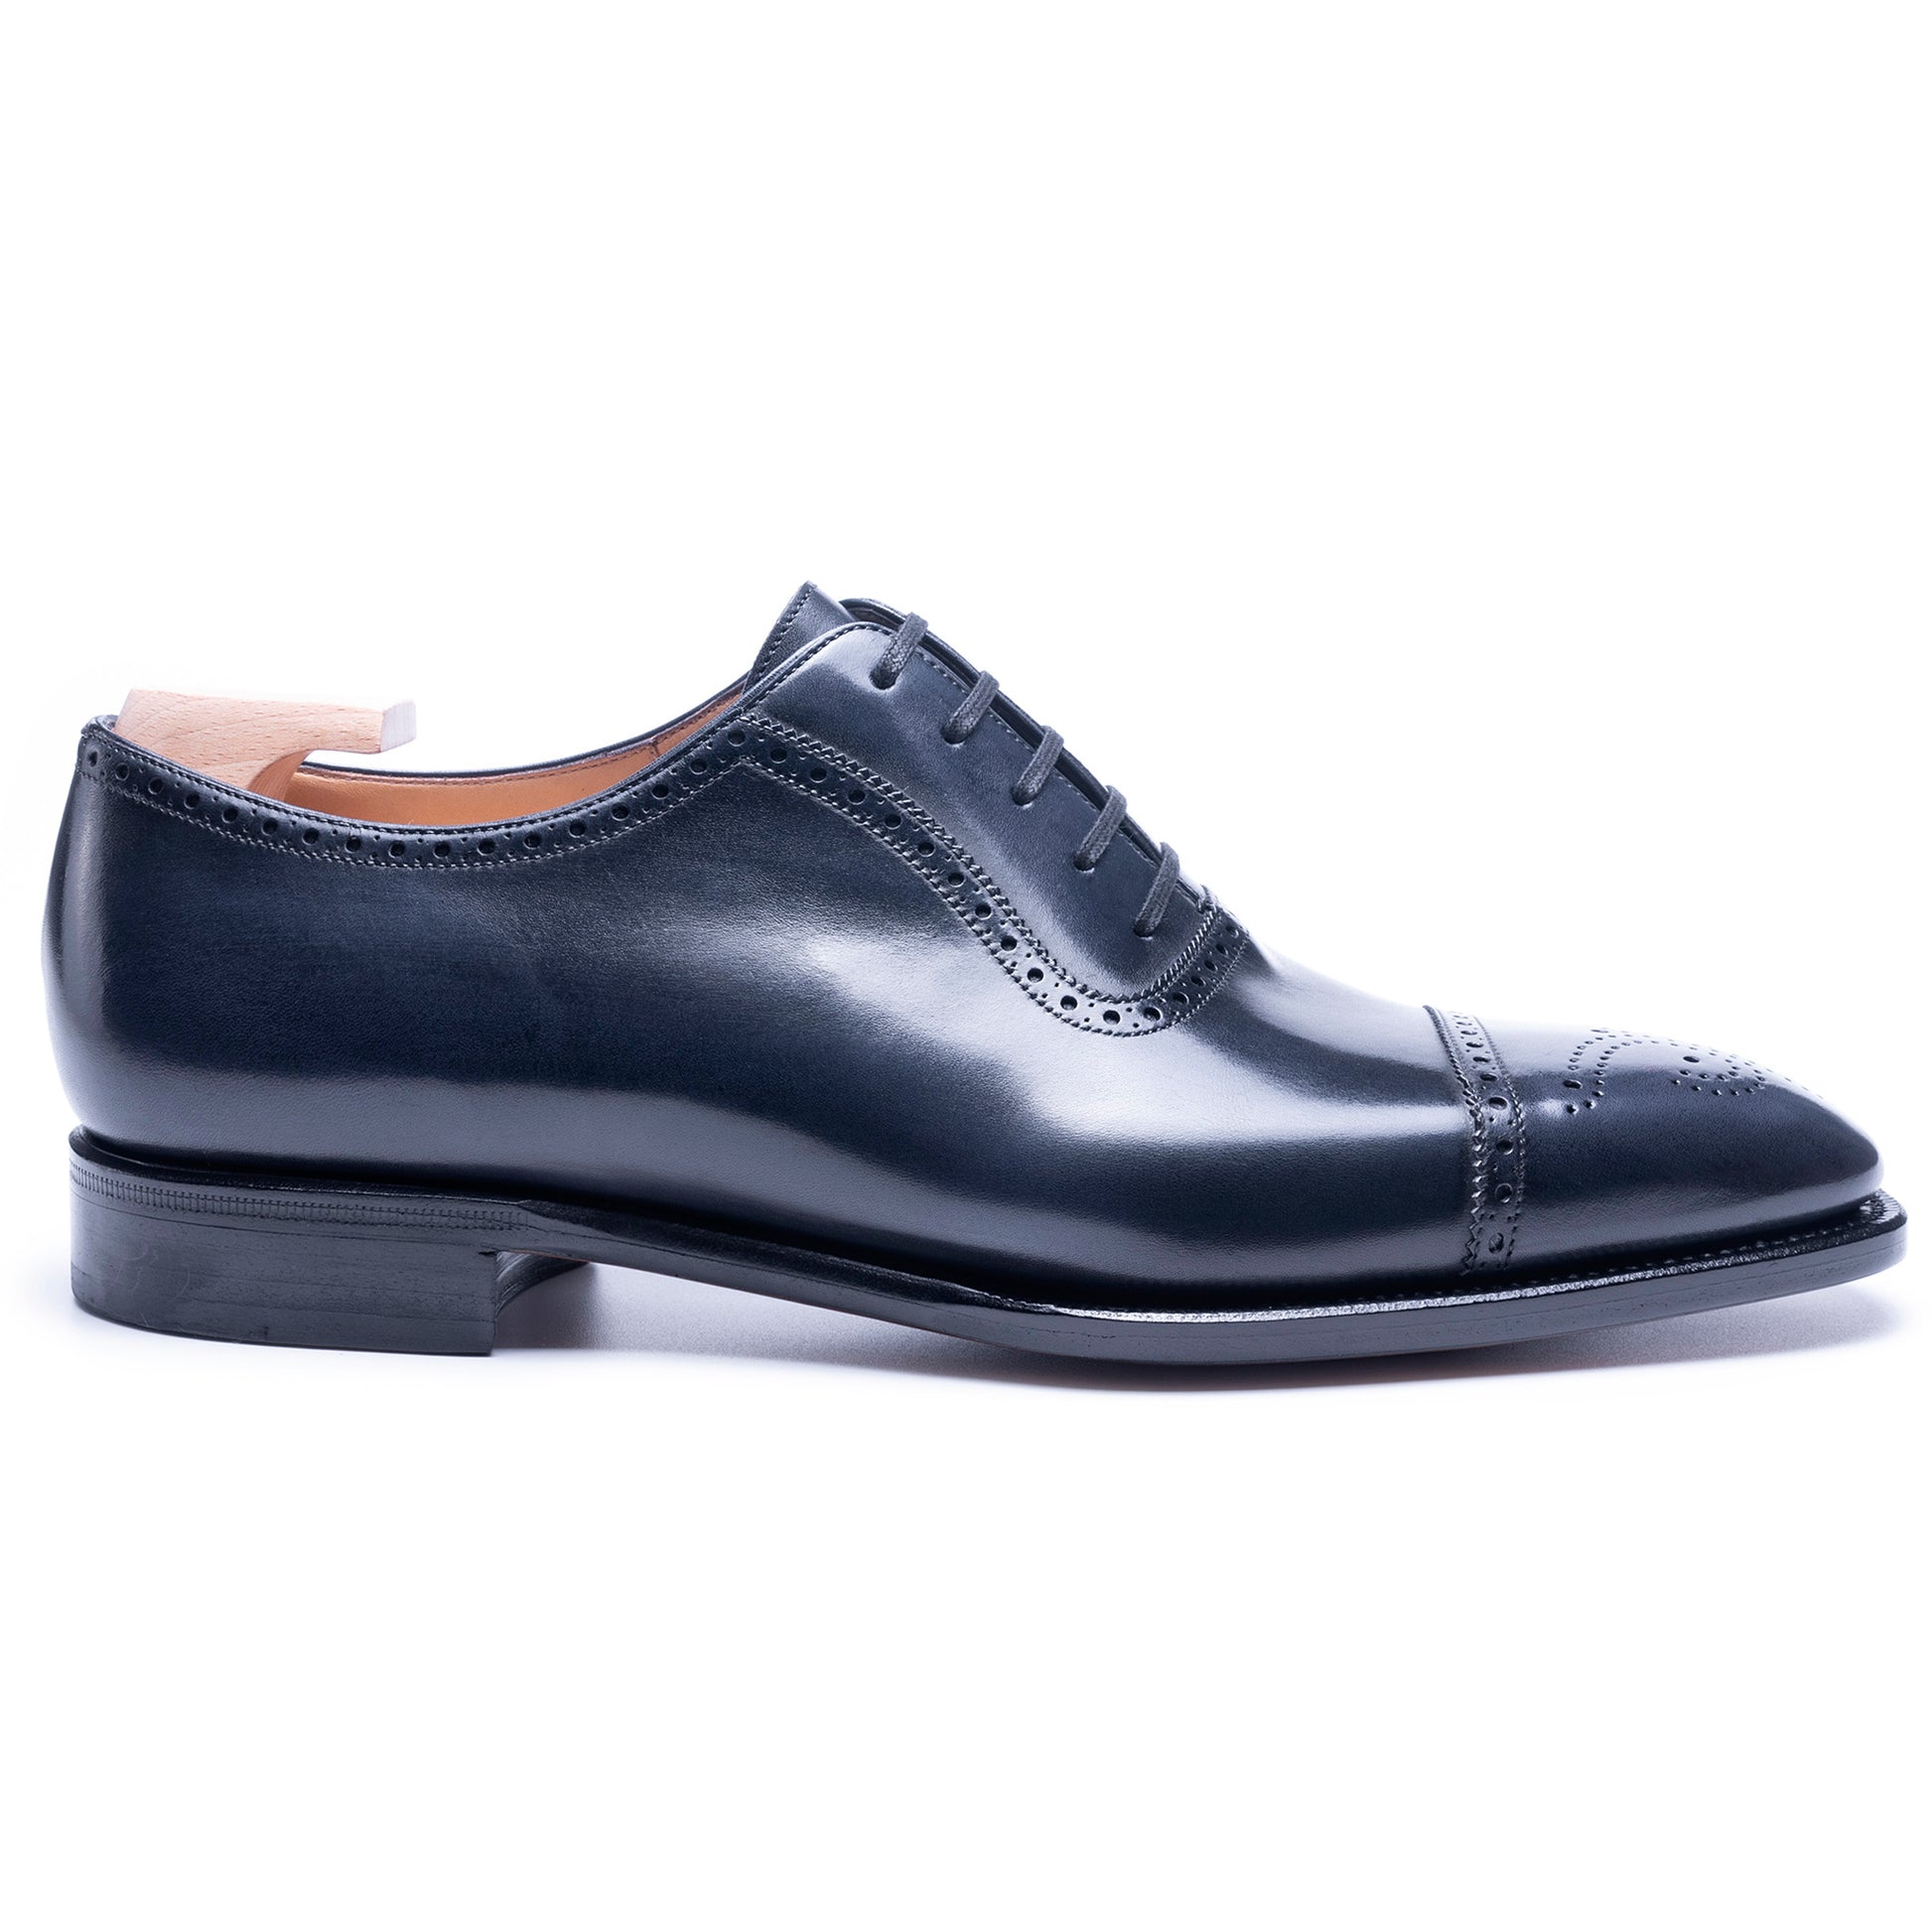 TLB Mallorca leather shoes 240 / PICASSO / VEGANO NAVY